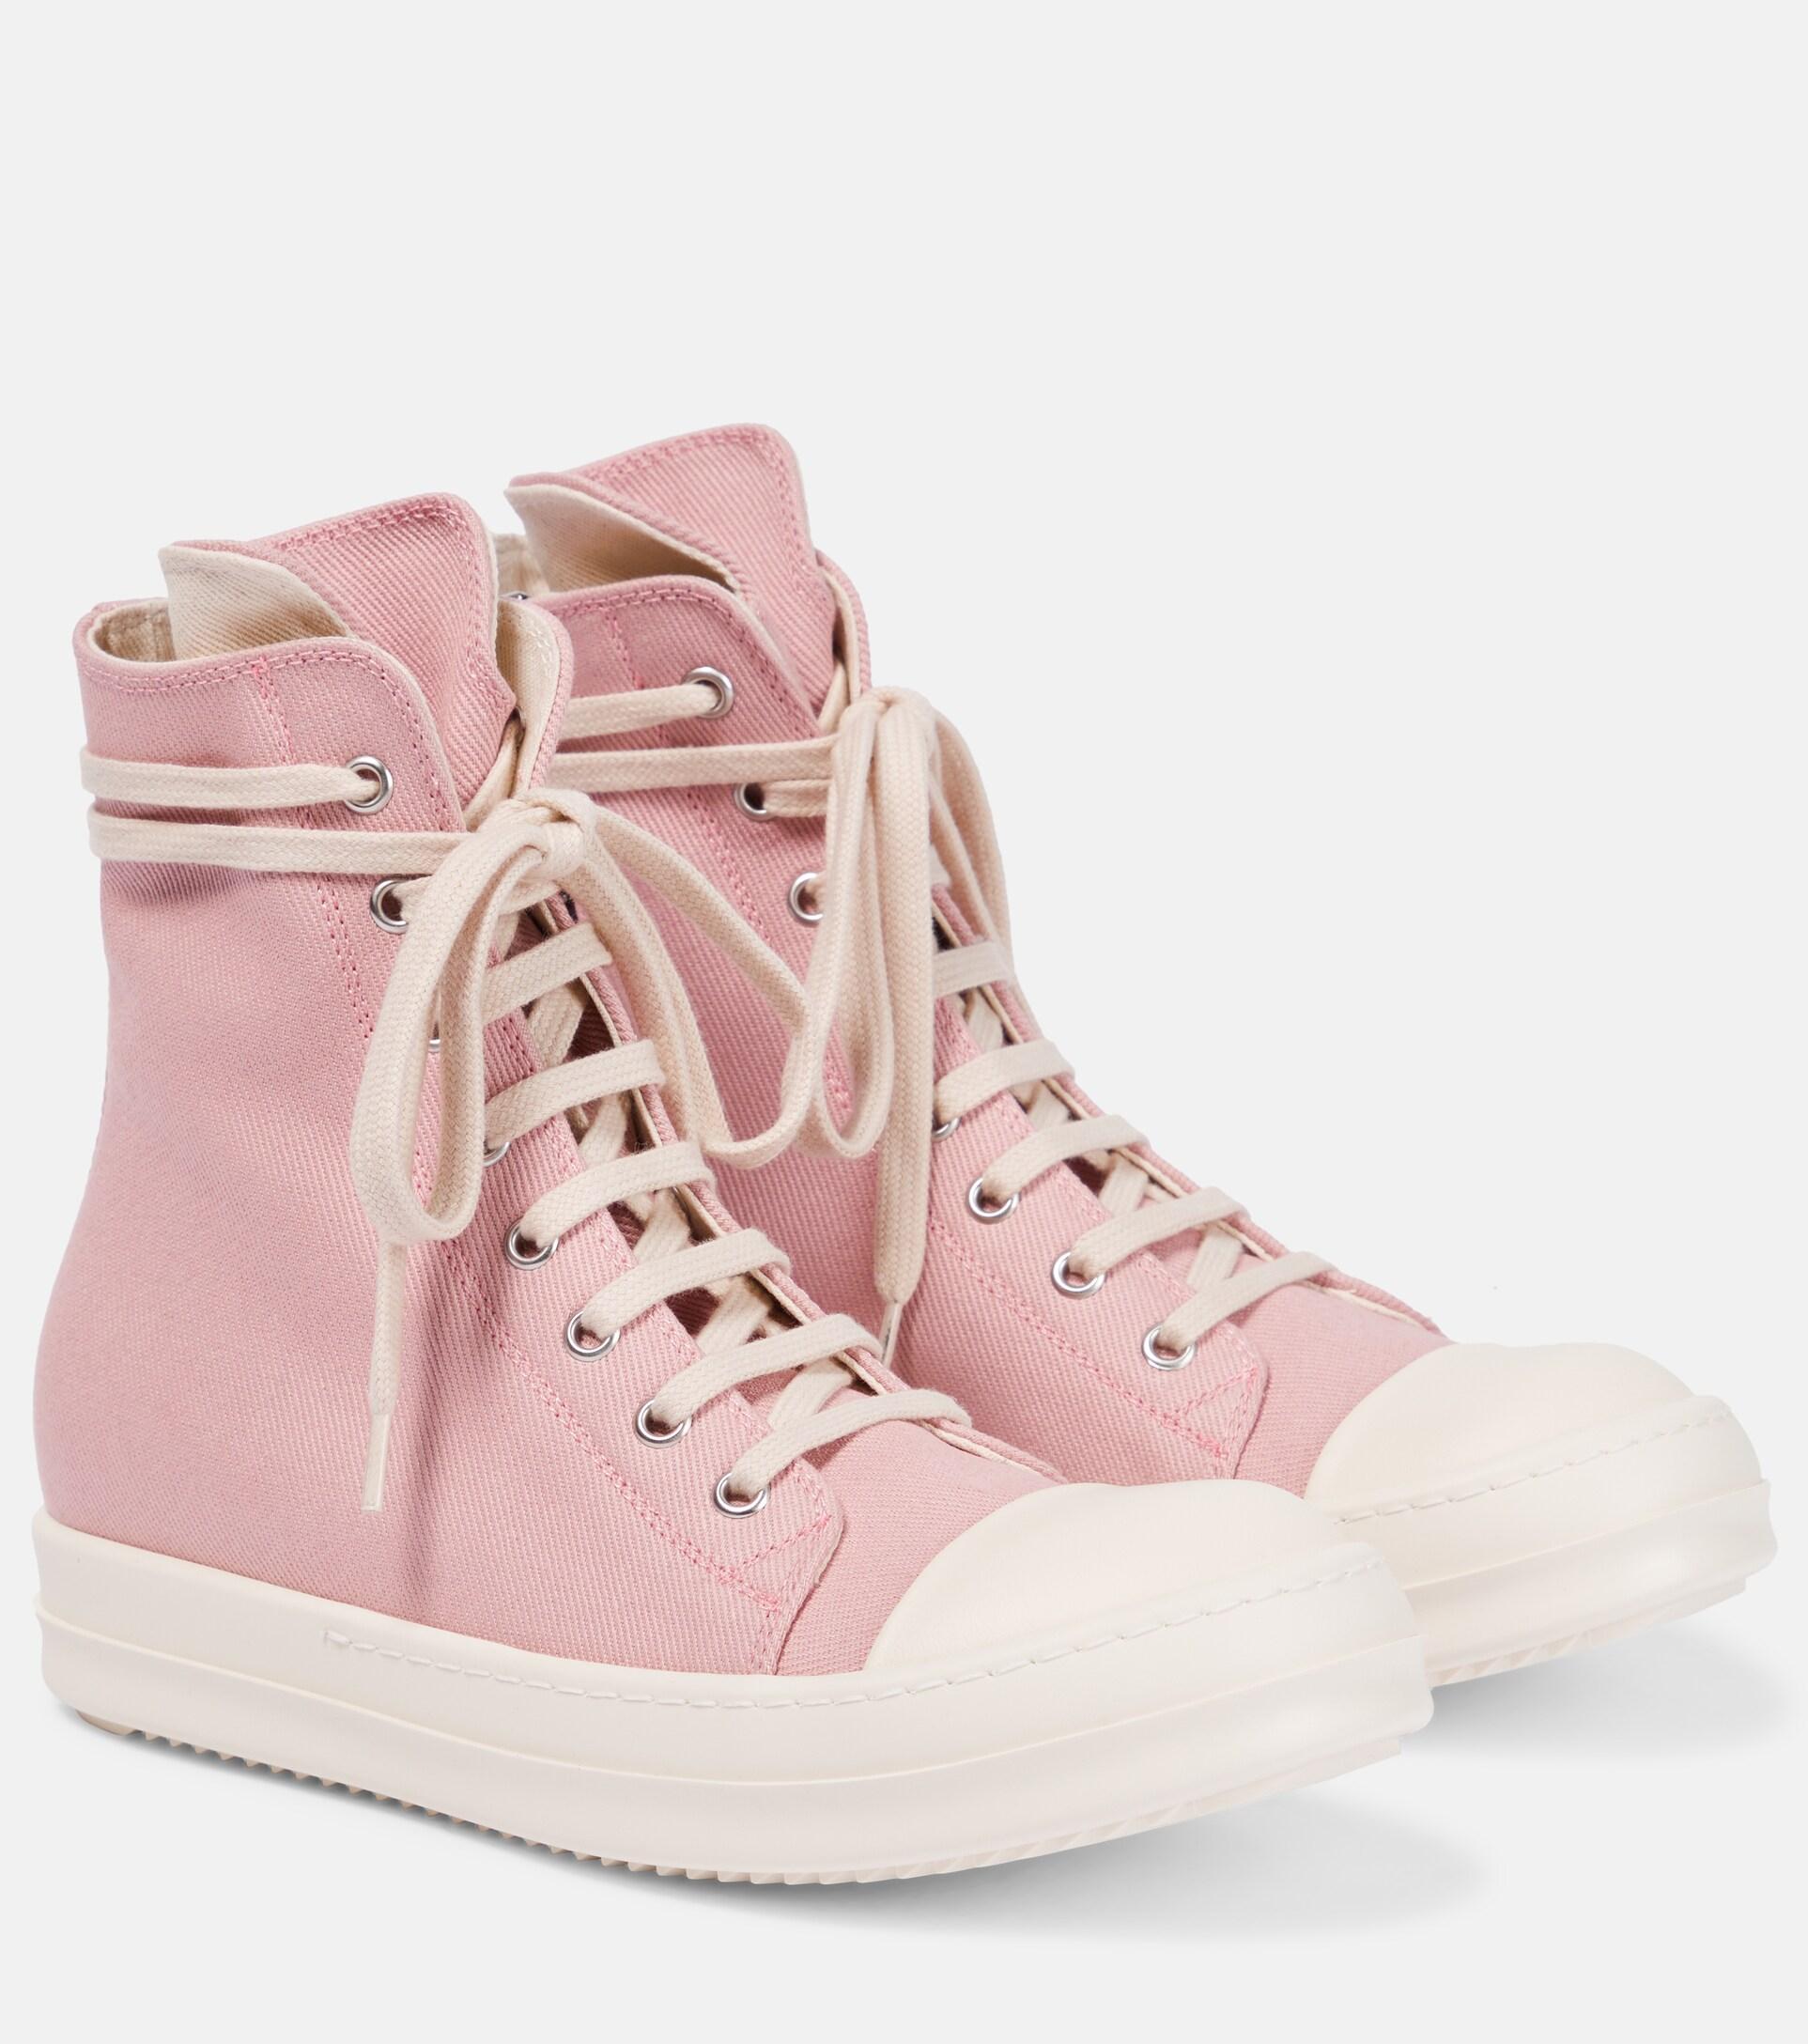 pink rick owens shoes, amazing deal UP TO 72% OFF - larawebdev.com